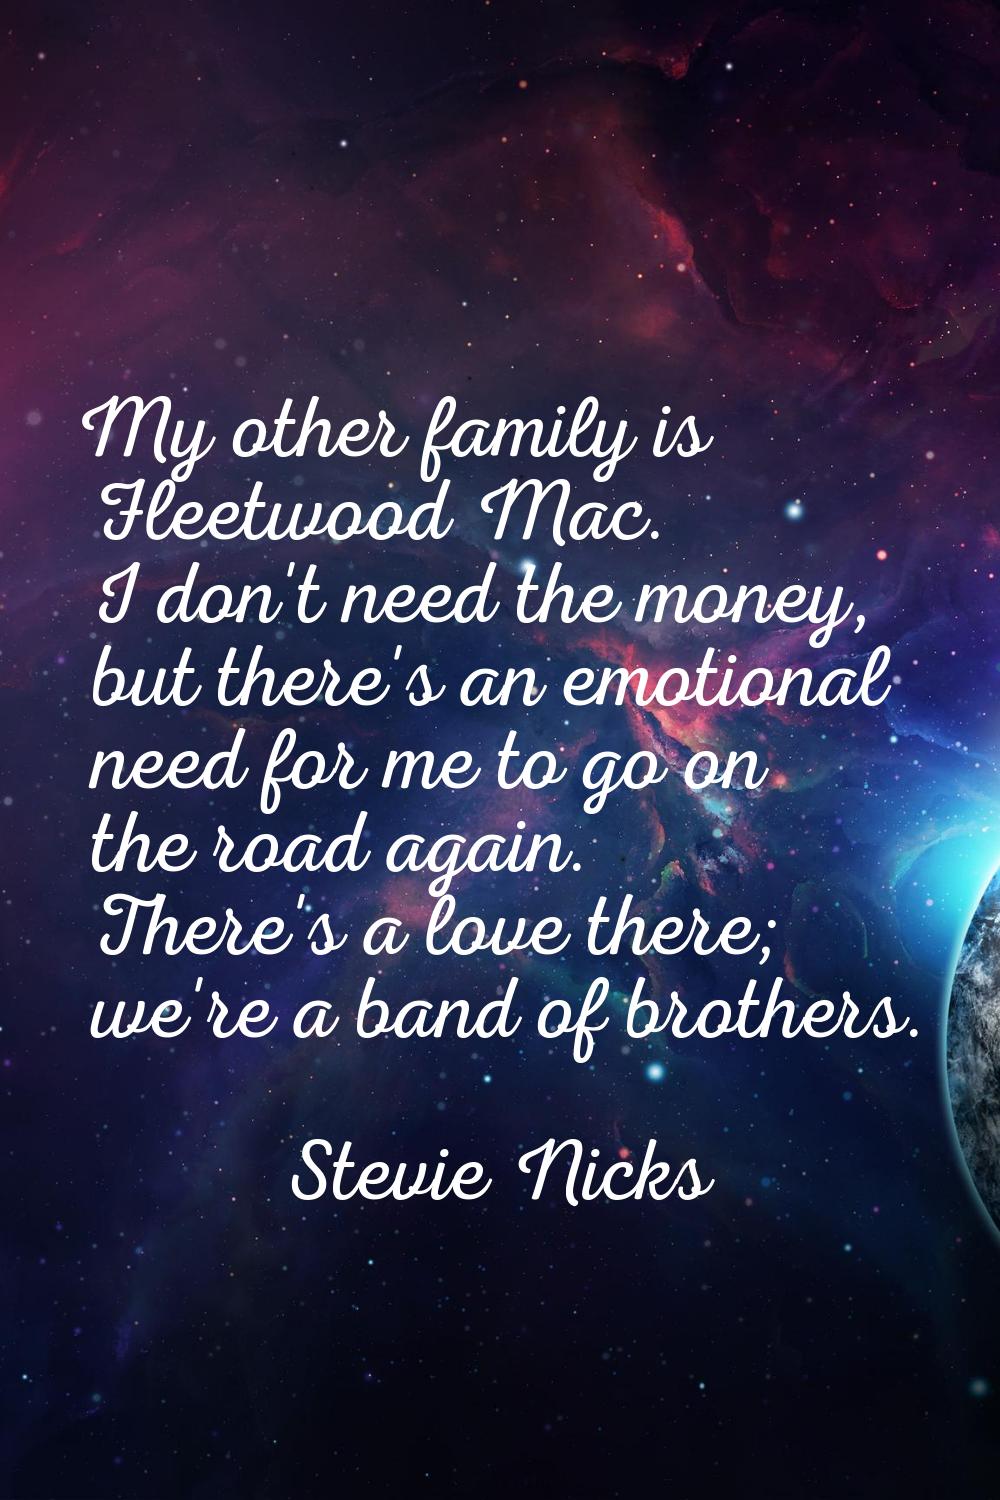 My other family is Fleetwood Mac. I don't need the money, but there's an emotional need for me to g